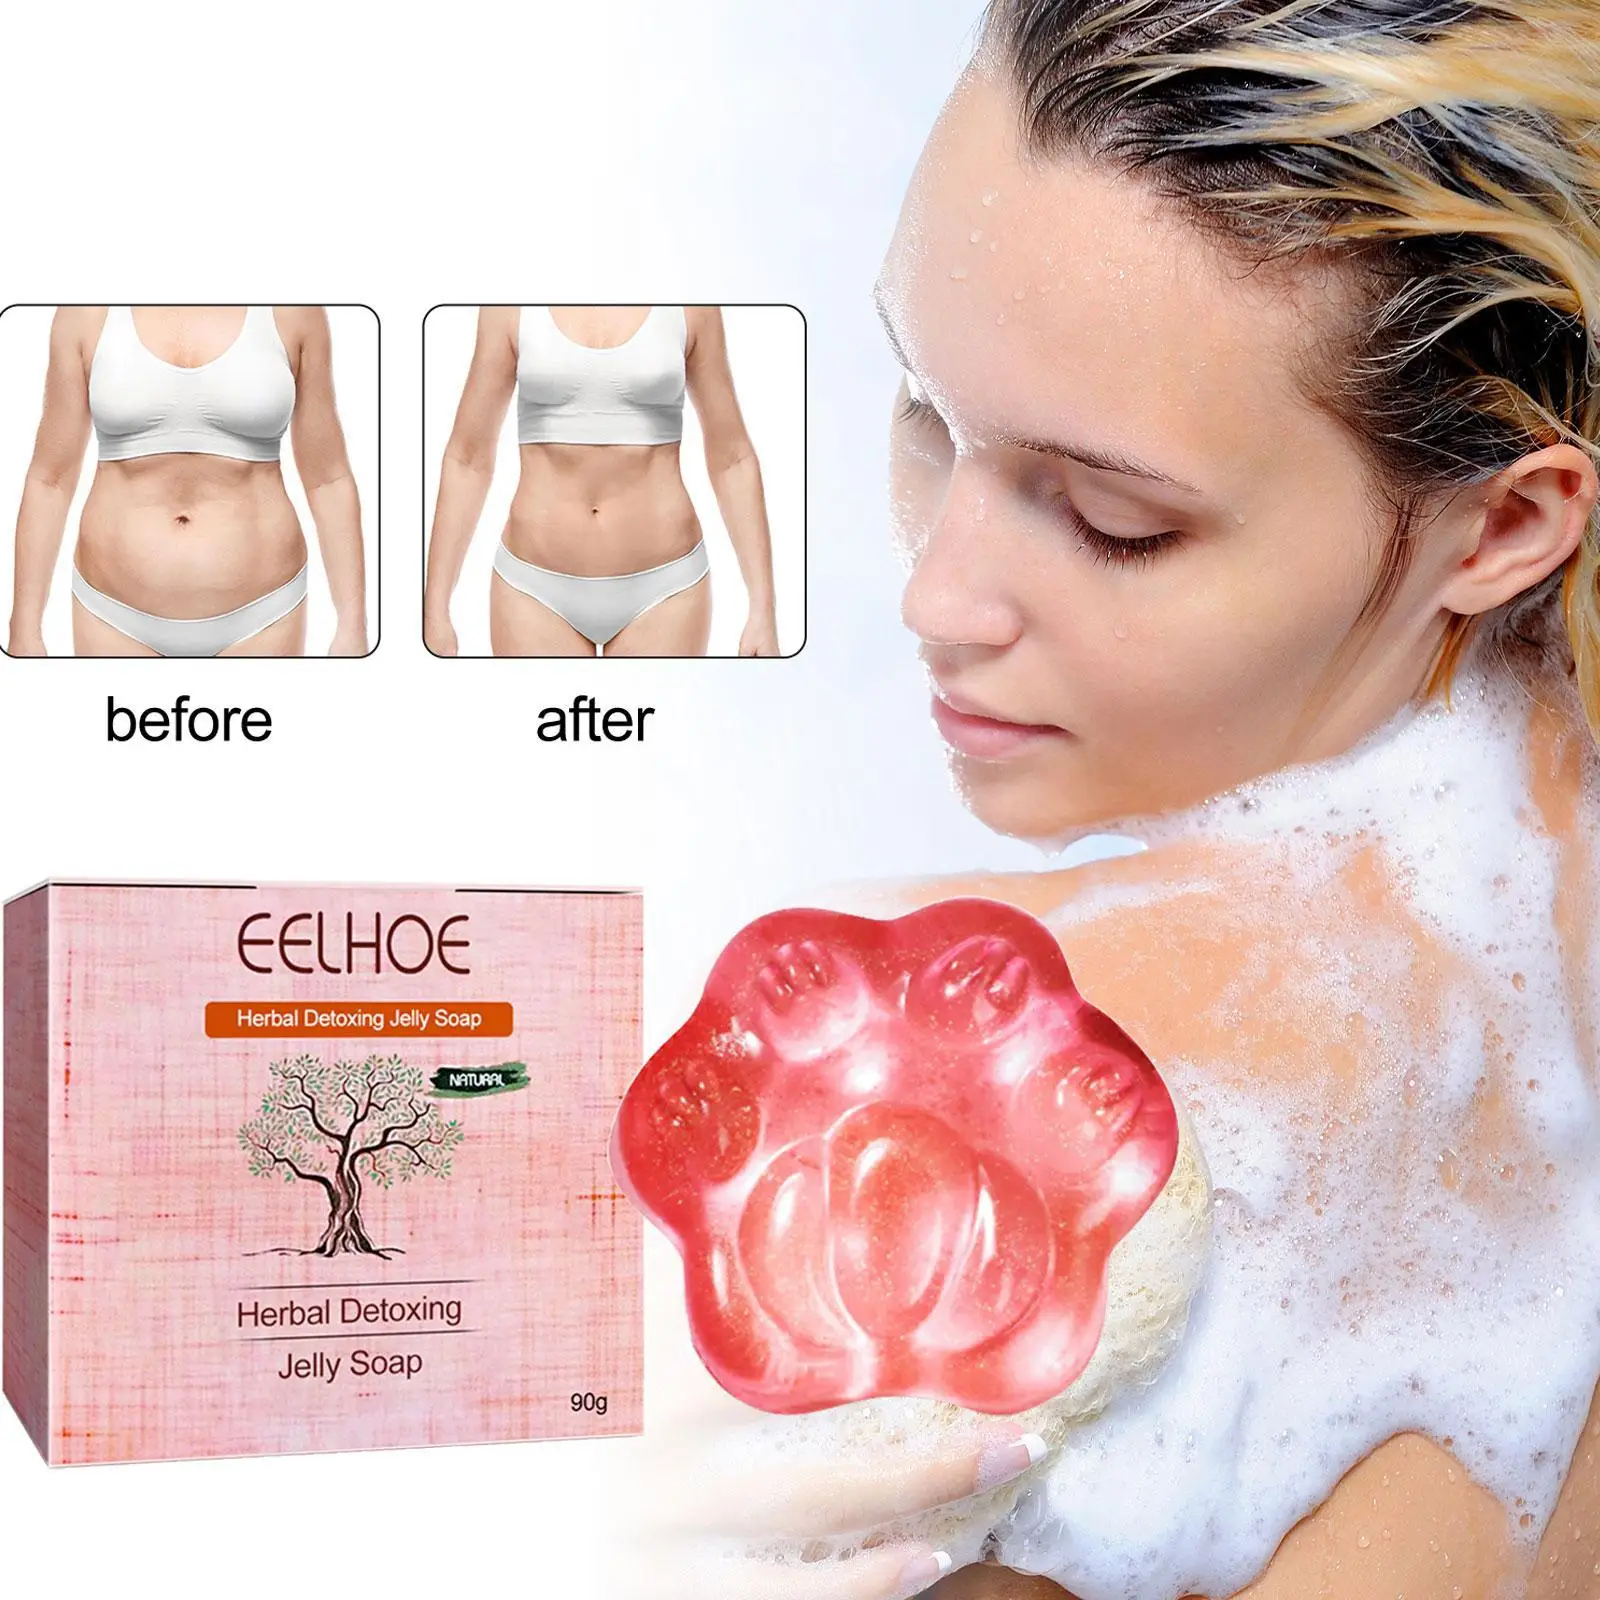 

90g Herbal Detoxing Jelly Soap Anti Cellulite Firming Soap Fat Burning Slimming Weight Loss Firming Anti Cellulite Soap Women